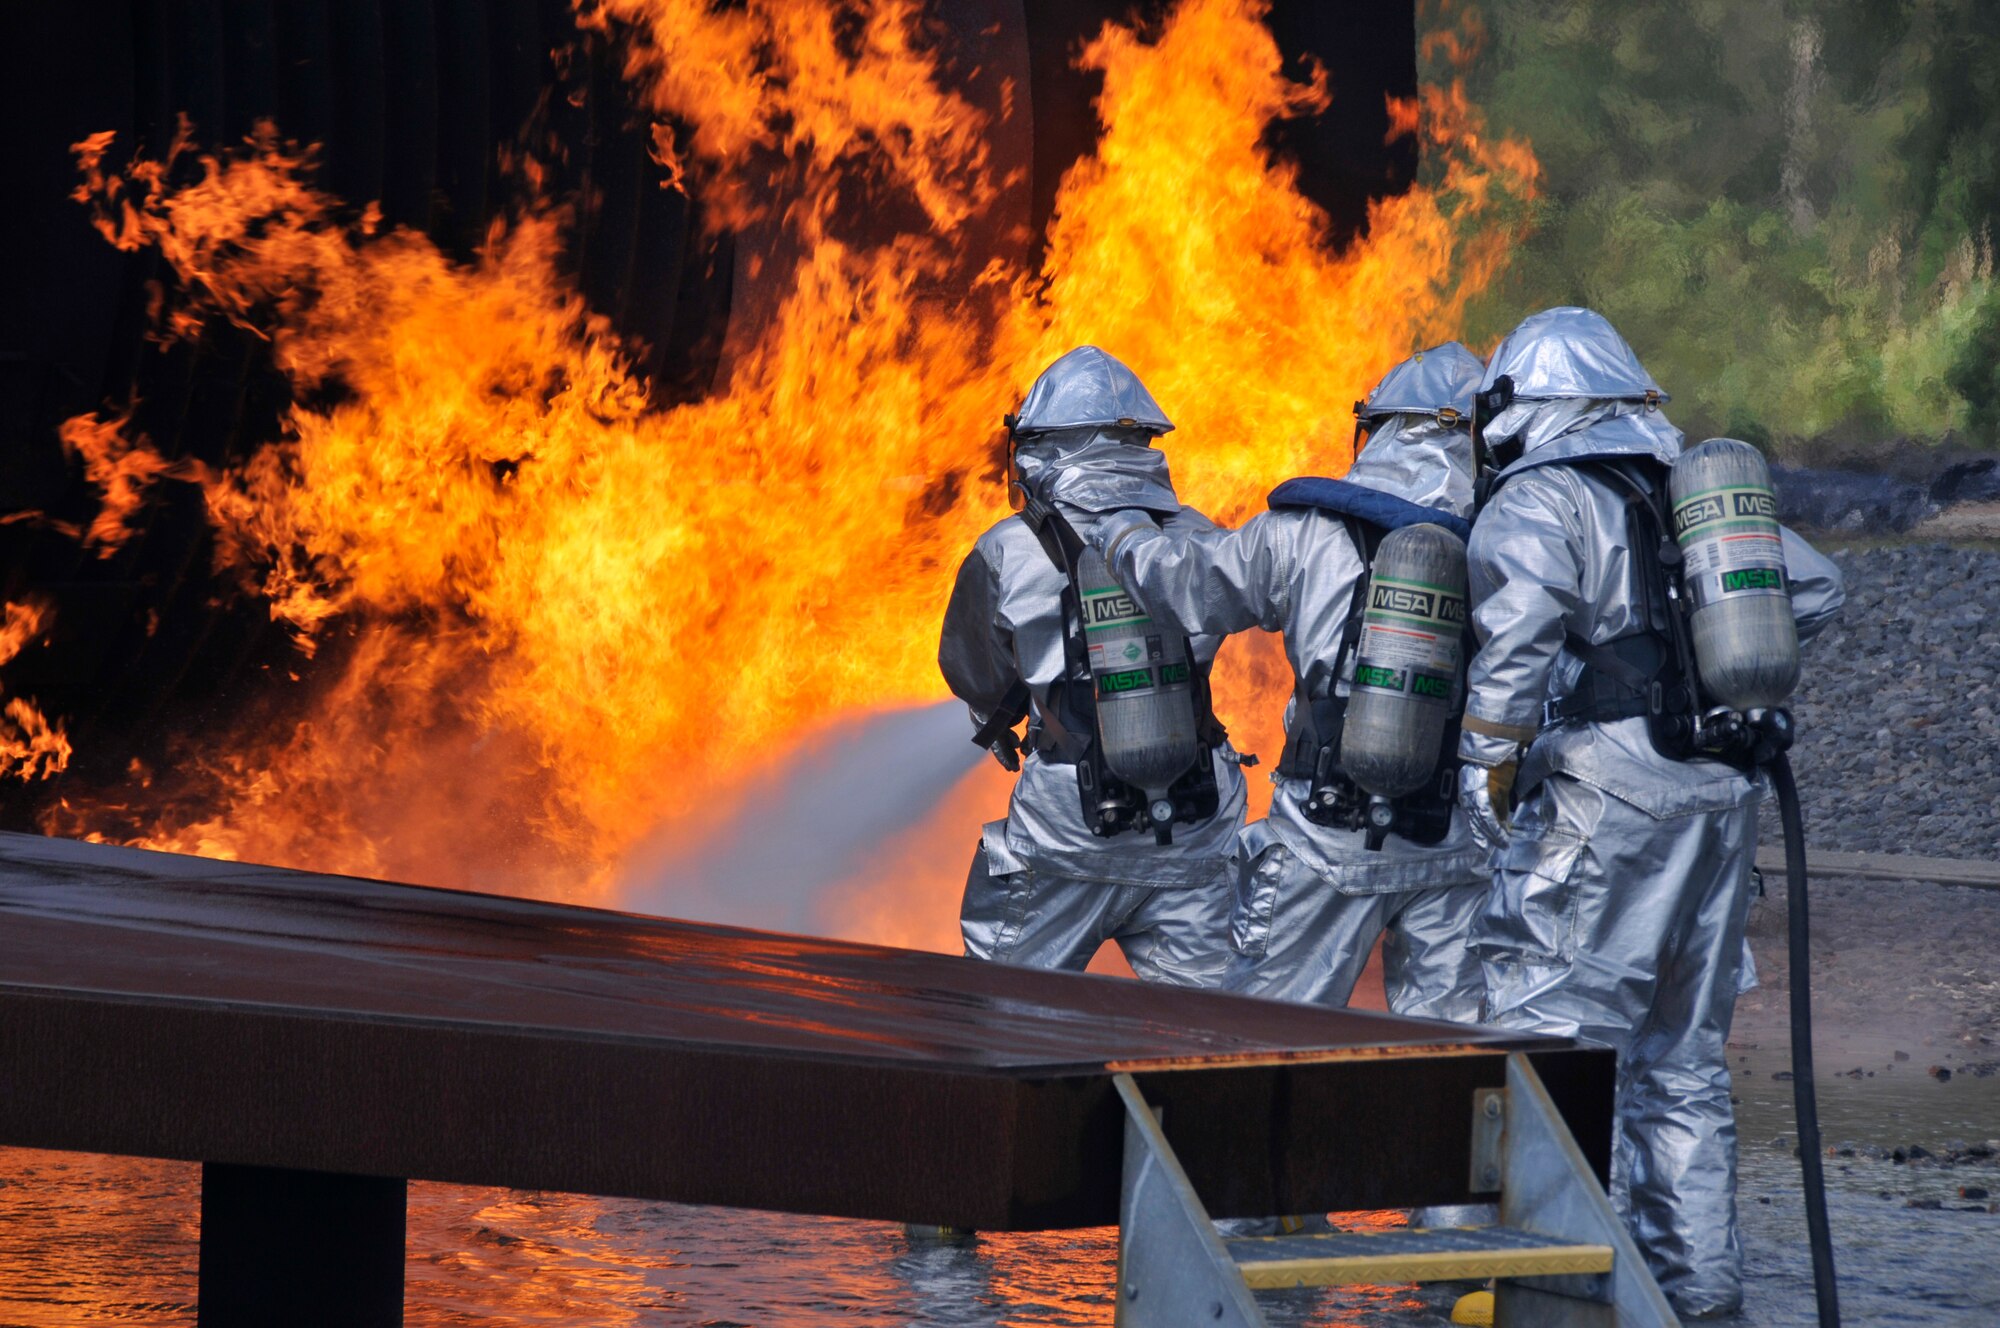 Members of Homestead Air Reserve Base, Fla.’s Fire Department extinguish a fire outside the burning fuselage of a mock aircraft during aircraft live fire training at Homestead ARB May 15. Fires can heat up the mock aircraft to approximately 1,200 degrees. The aircraft live fire training consists of responding to the fire, setting up on the aircraft, deploying hose lines, and attacking and extinguishing the fire. (U.S. Air Force photo/Senior Airman Nicholas Caceres)